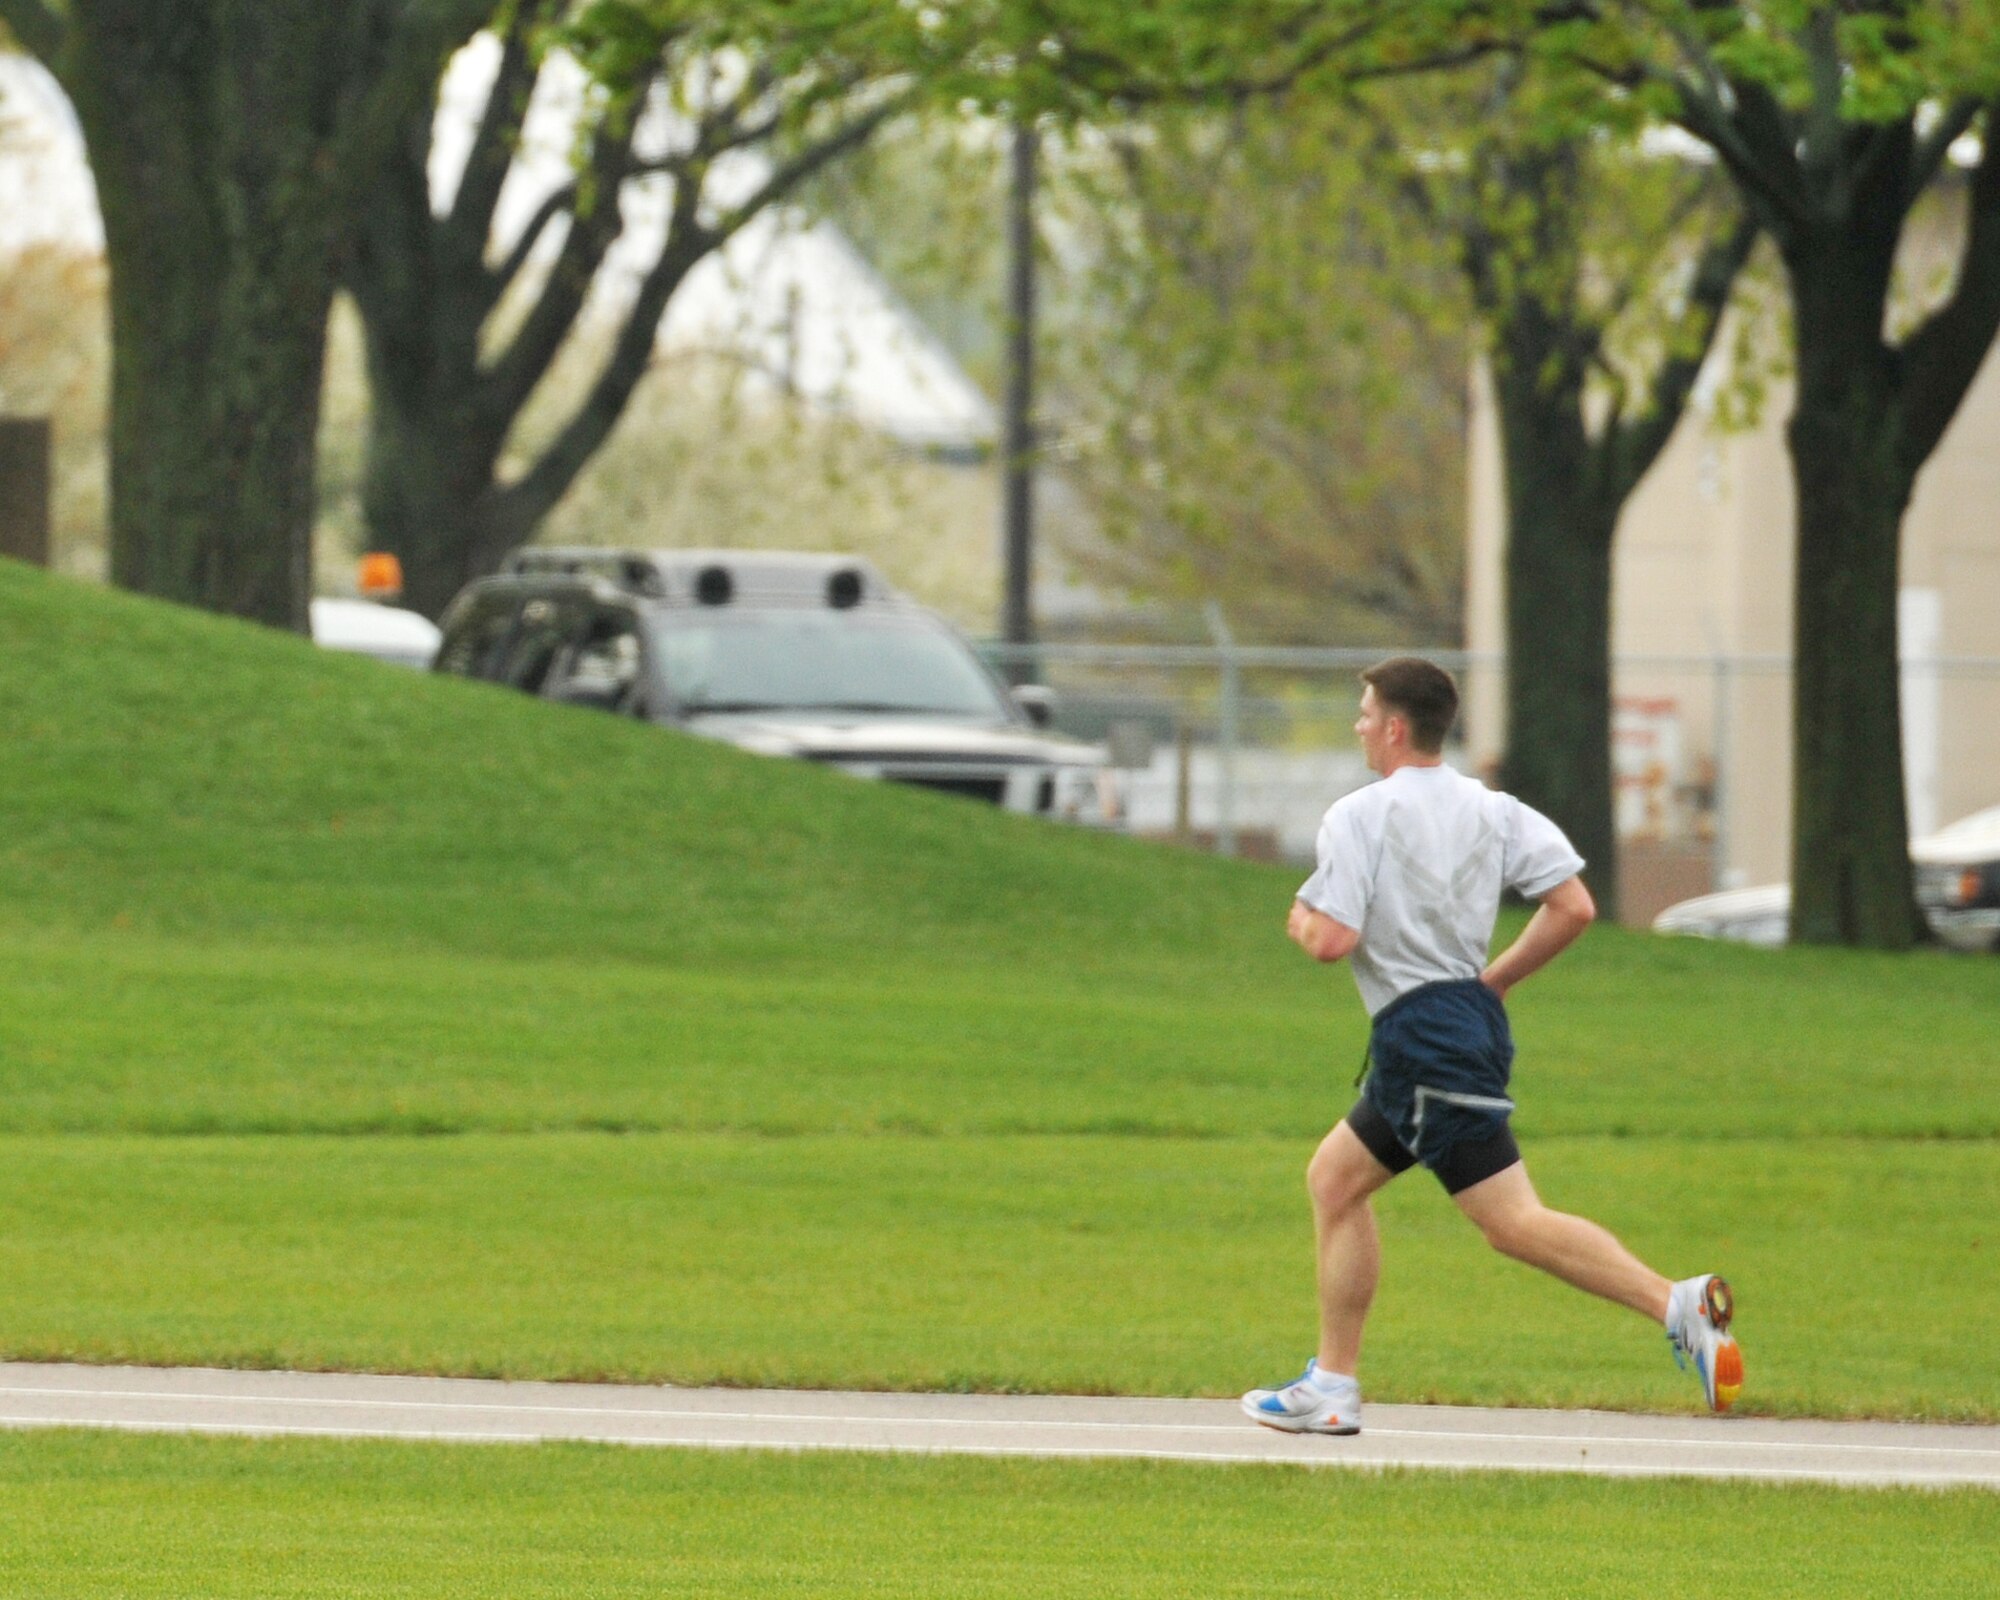 Airman 1st Class Robert Miles, 115th Force Support Squadron, runs on the Truax Field track as part of his annual physical fitness assessment April 15. Miles finished with a time of 7:59 which put him in the "Excellent" category with a perfect overall scoree of 100. Miles is also training for the National Guard Marathon in Lincoln, Neb., for a chance to make the National Guard Marathon Team which travels around the country to compete. Wisconsin Air National Guard photo by Tech. Sgt. Jon LaDue